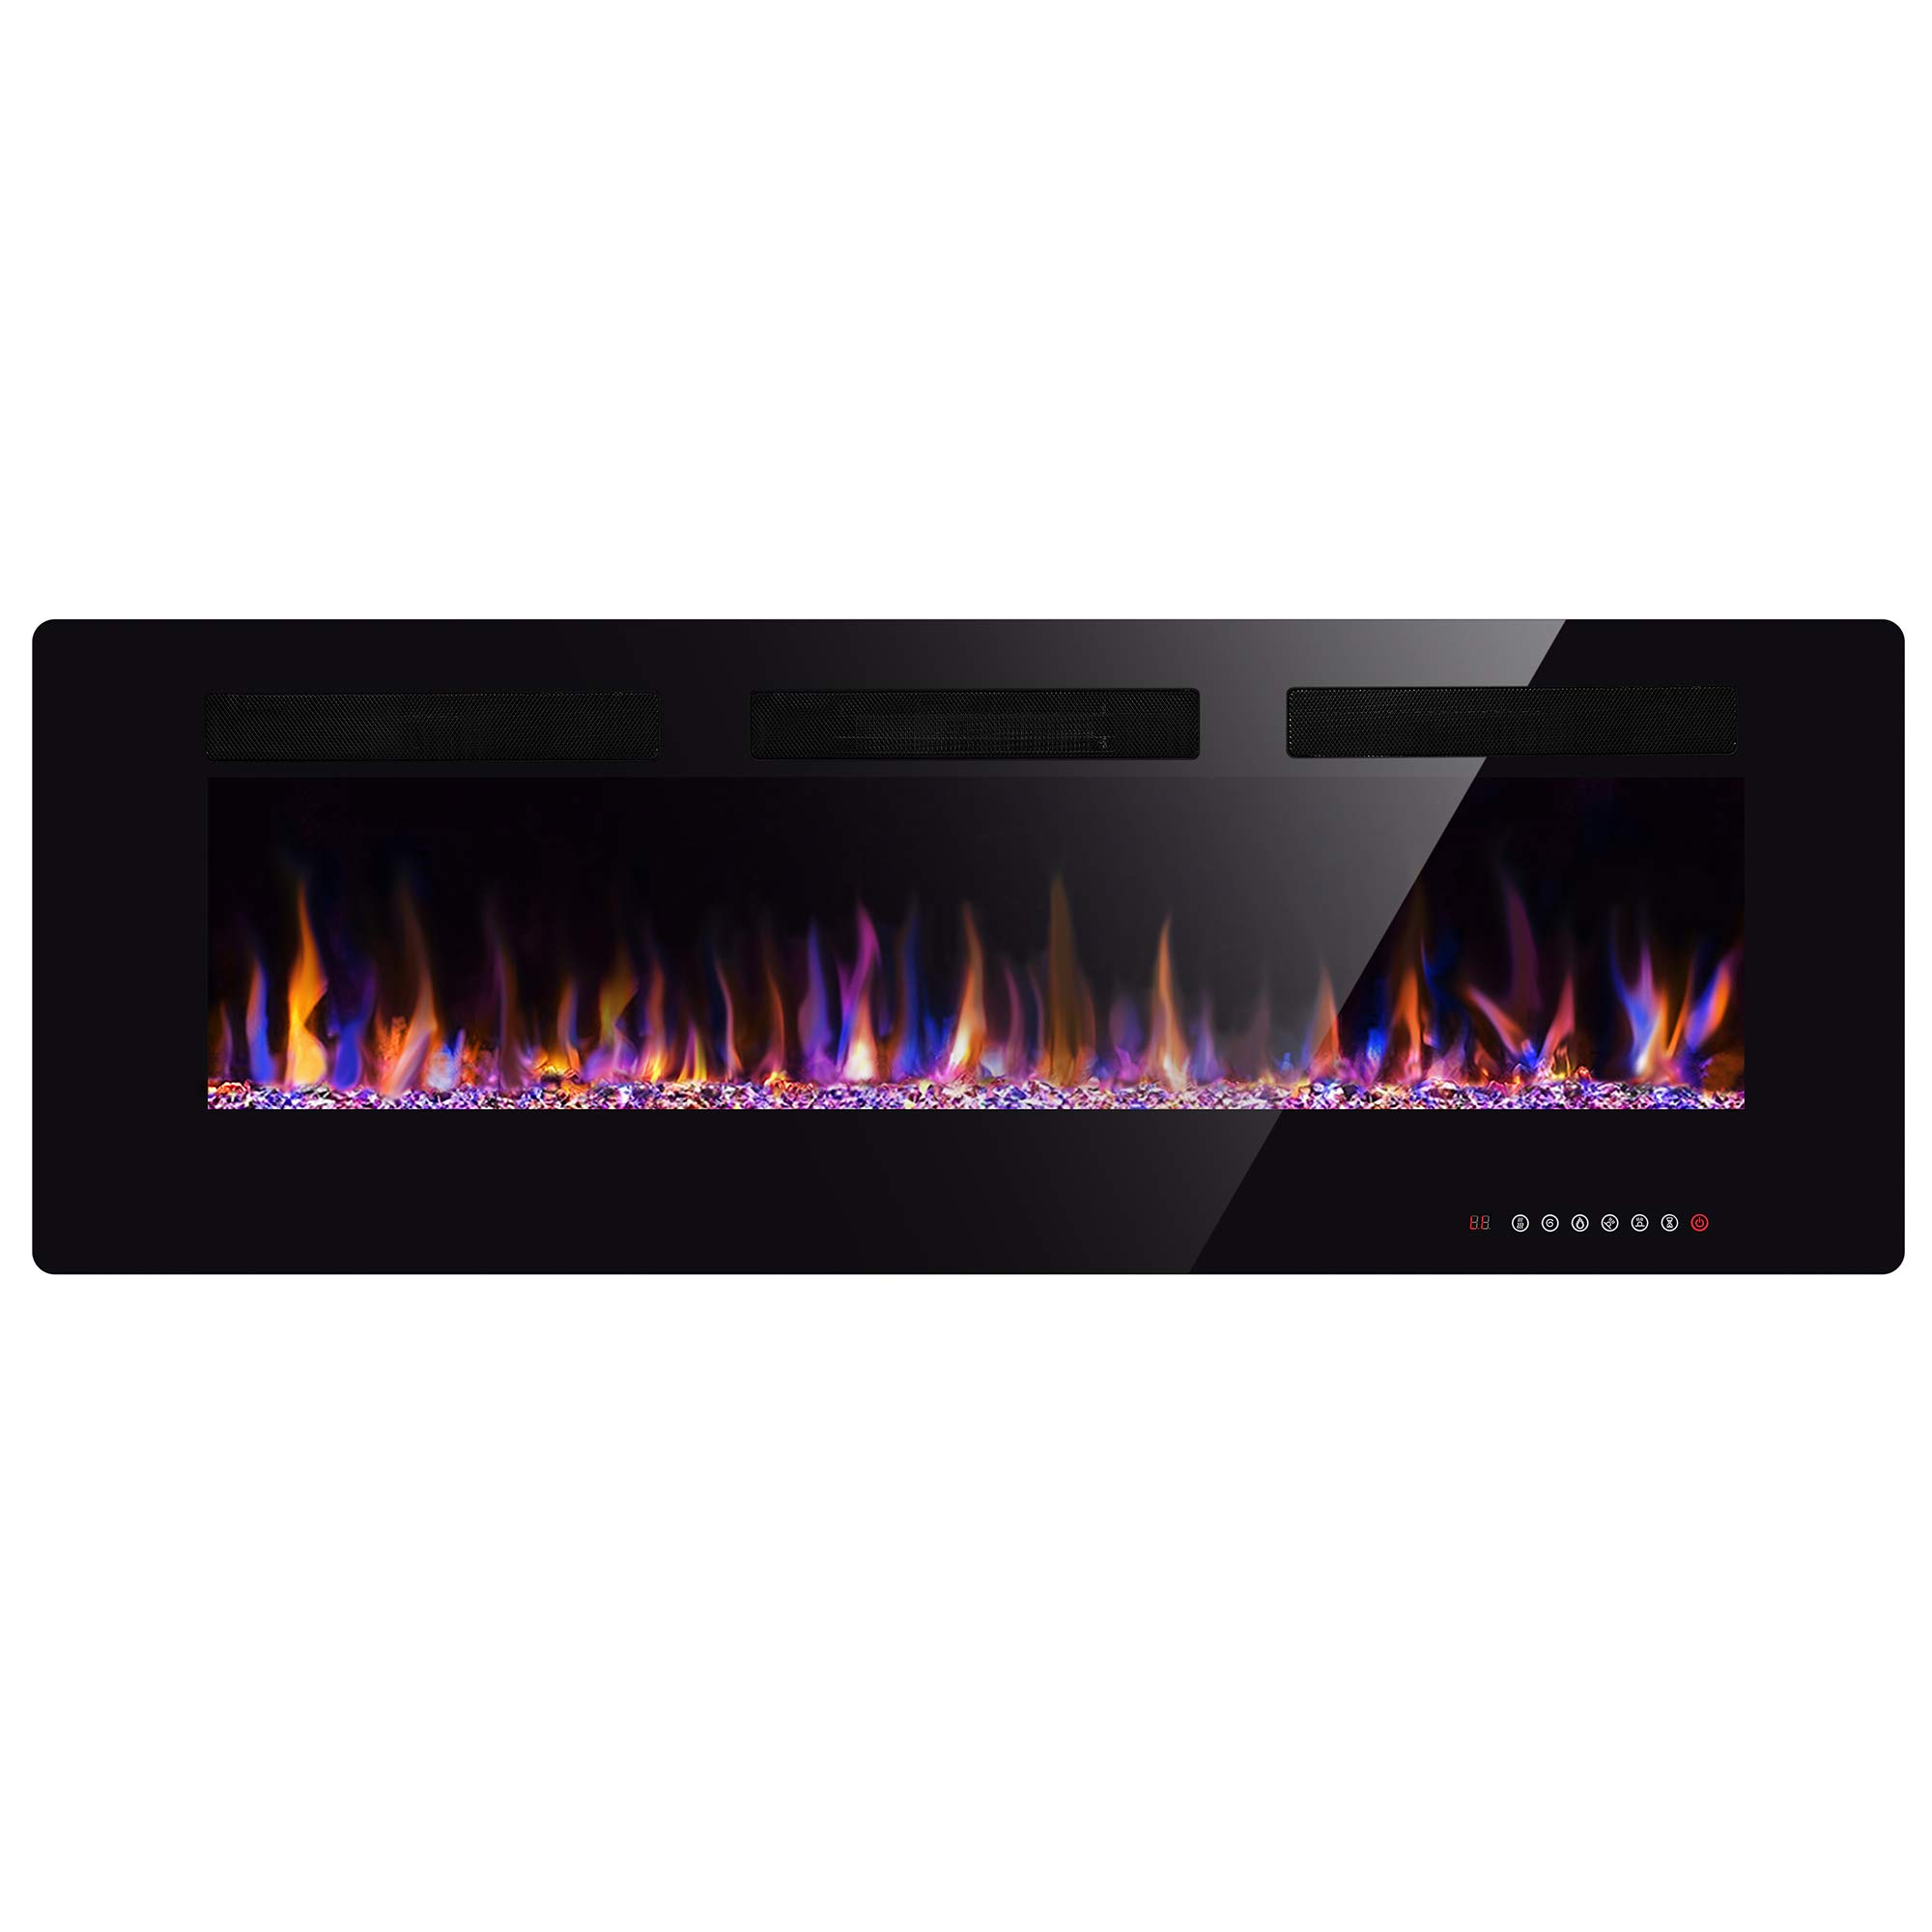 Xbeauty 50" Electric Fireplace in-Wall Recessed and Wall Mounted 1500W Fireplace Heater and Linear Fireplace with Timer/Multicolor Flame